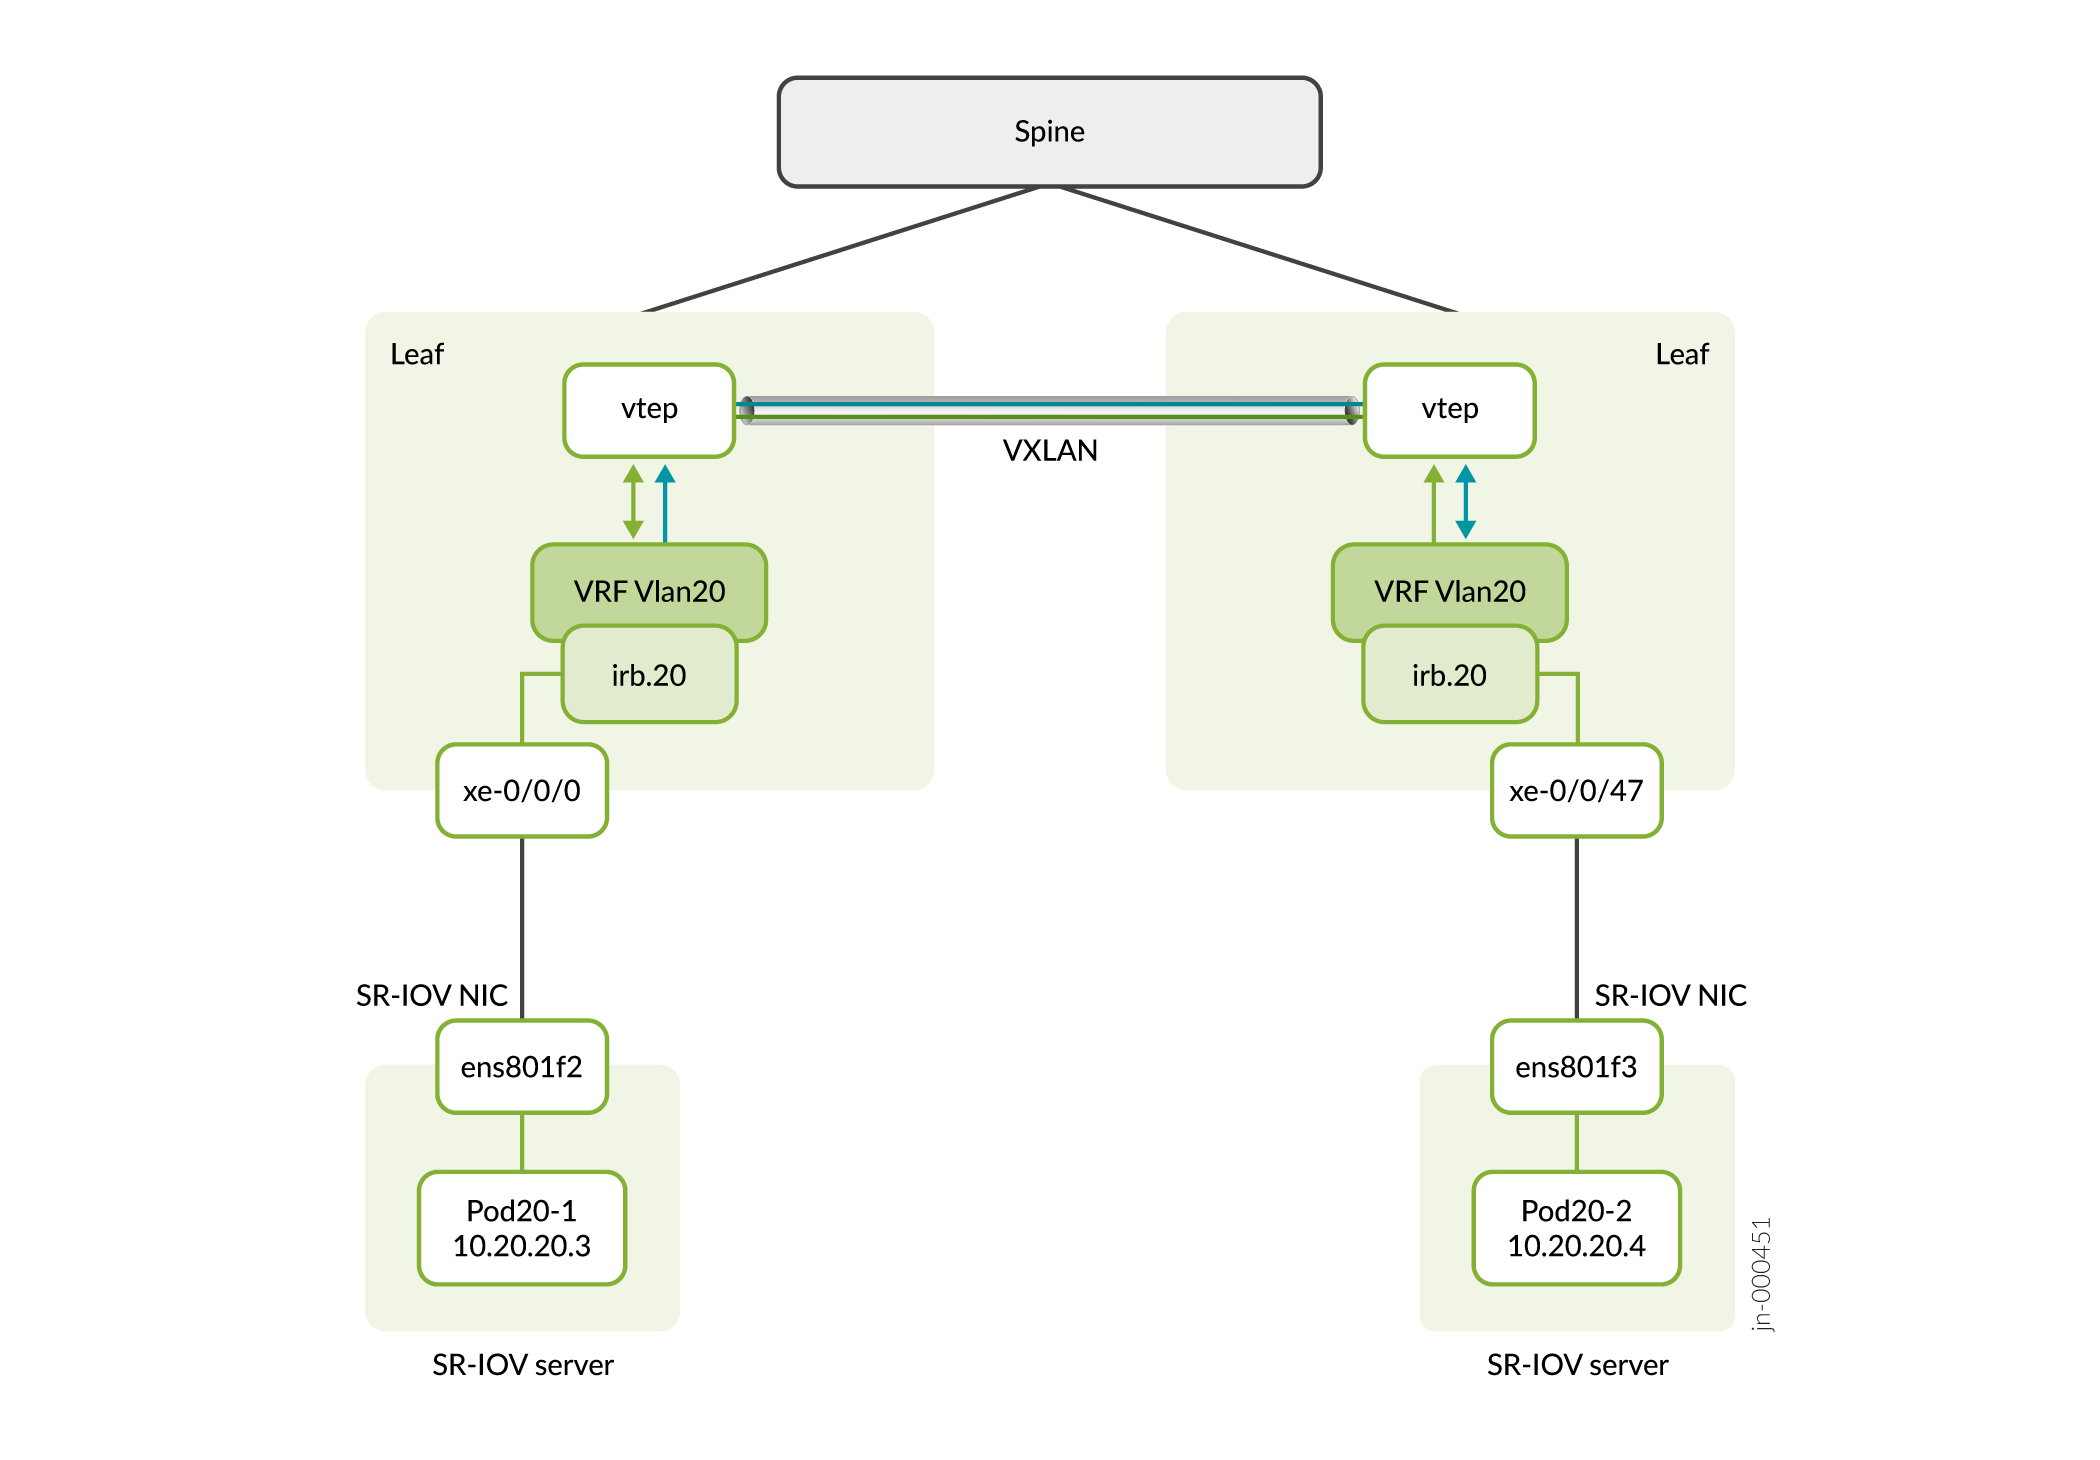 Intra-VNI: Pods That Belong to the Same Virtual Network